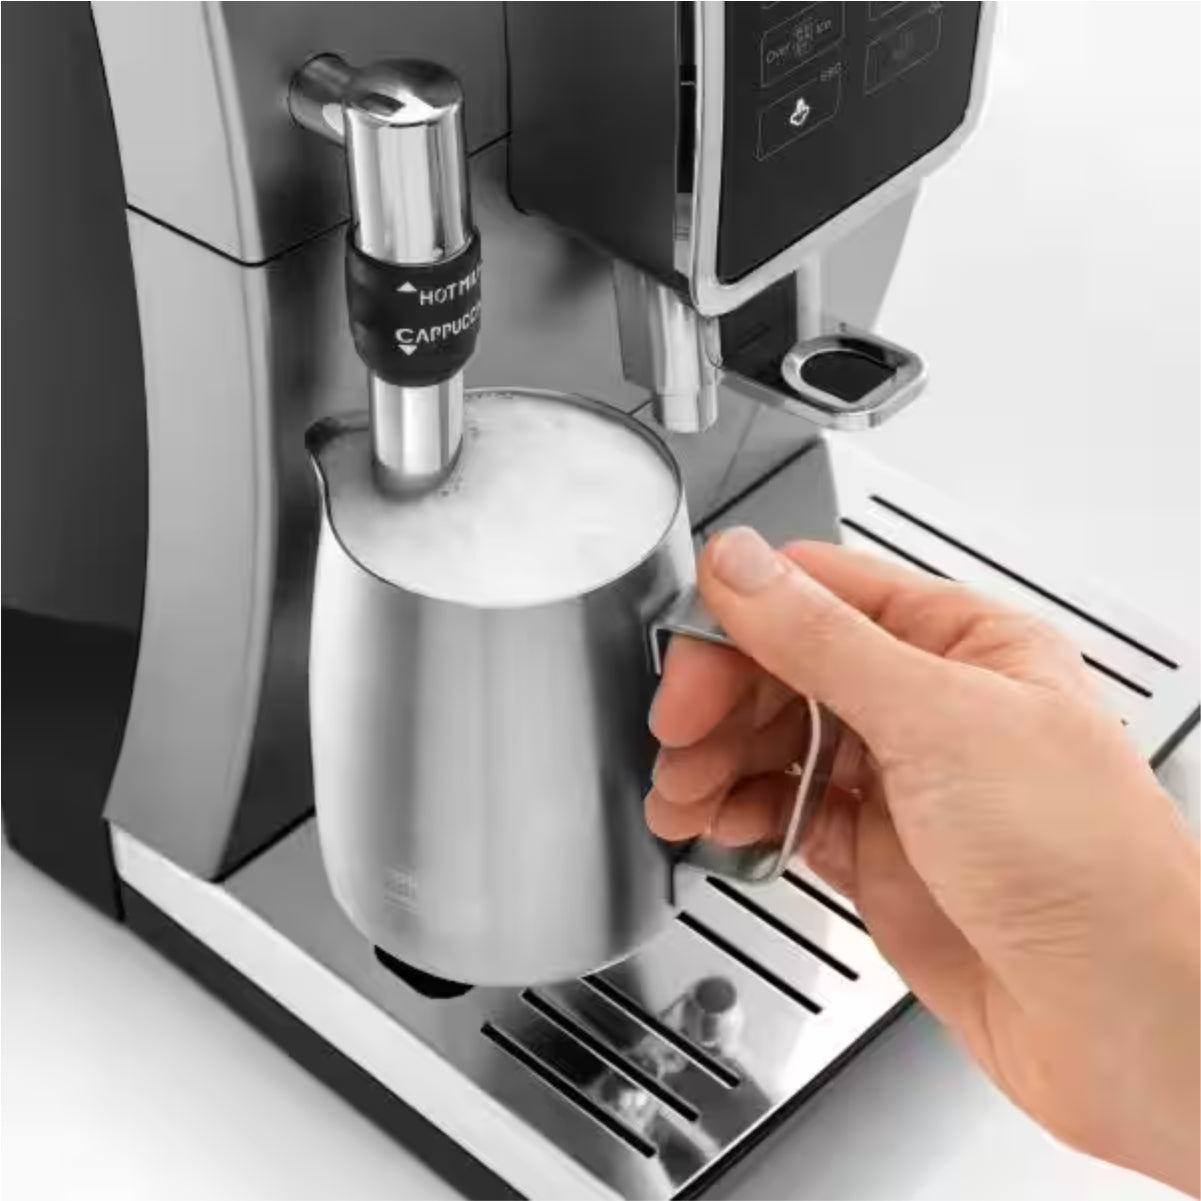 De'Longhi Dinamica with Adjustable Frothing Wand Automatic Coffee & Espresso Machine (Silver) - ECAM35025SB